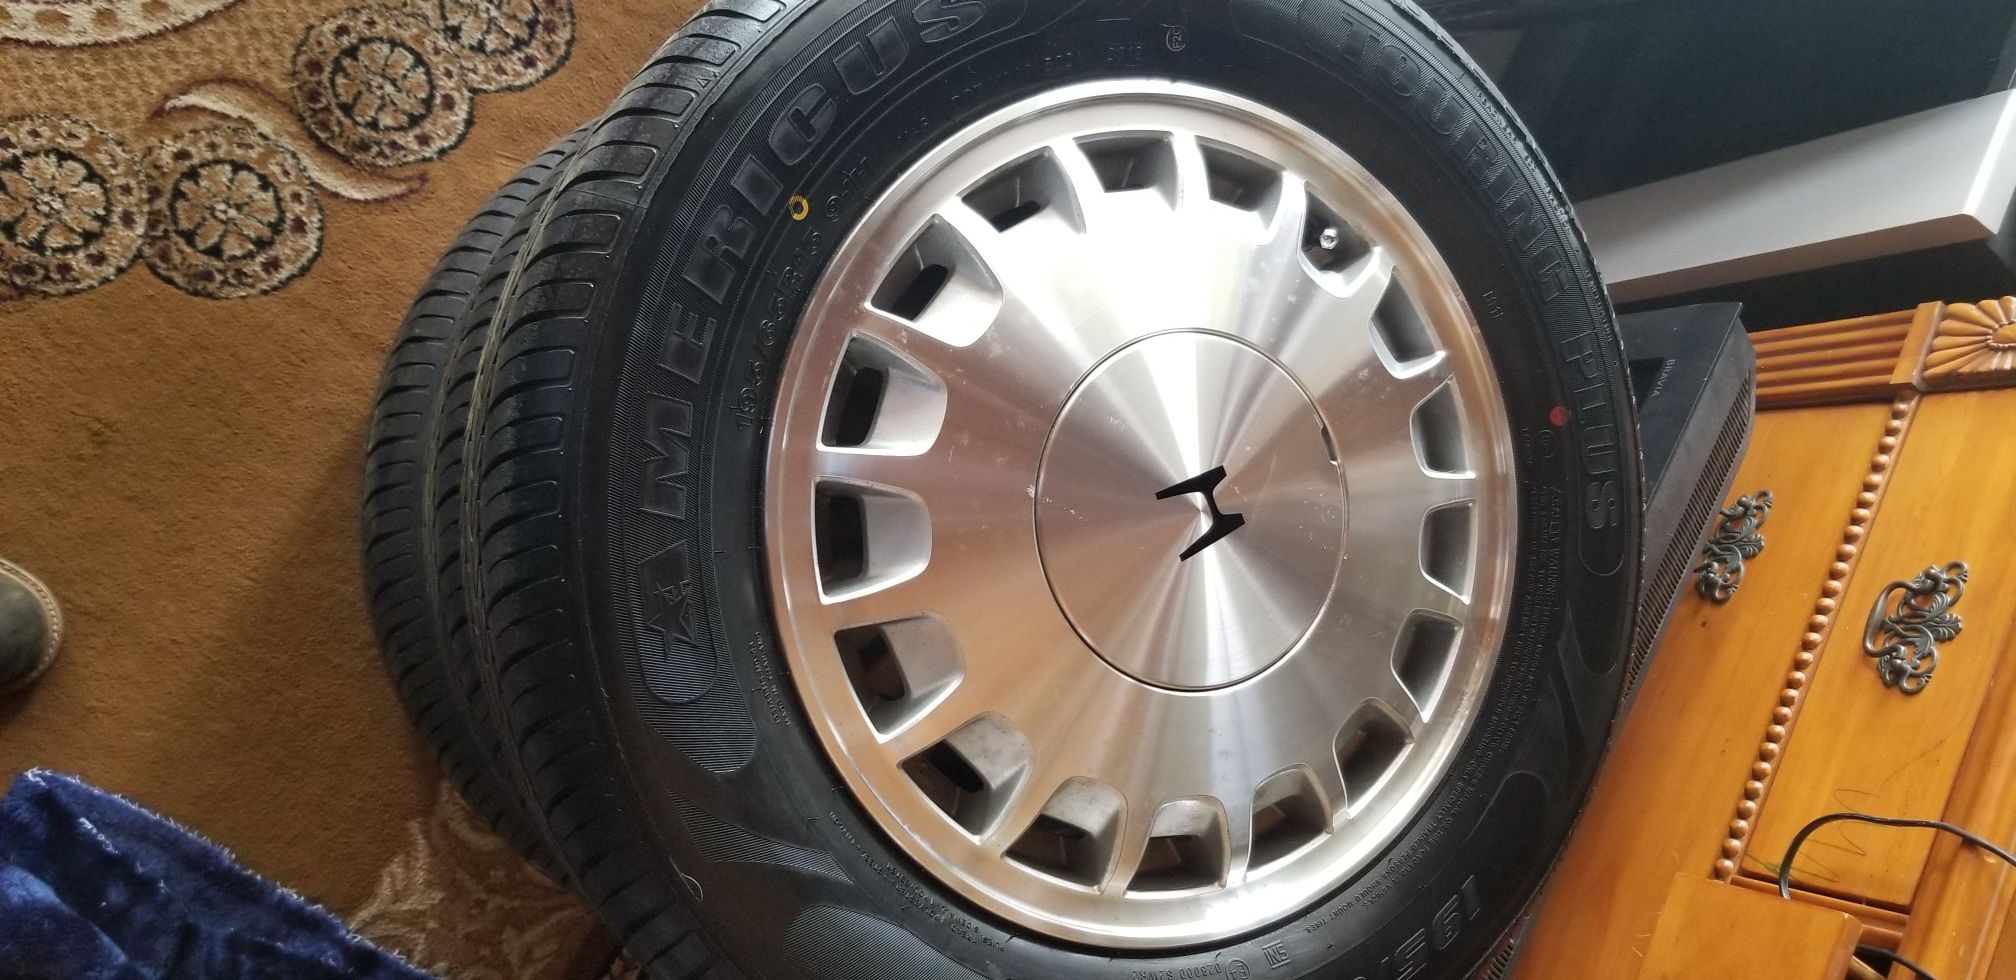 Honda Accord 90-96 rims with center caps and new tires.